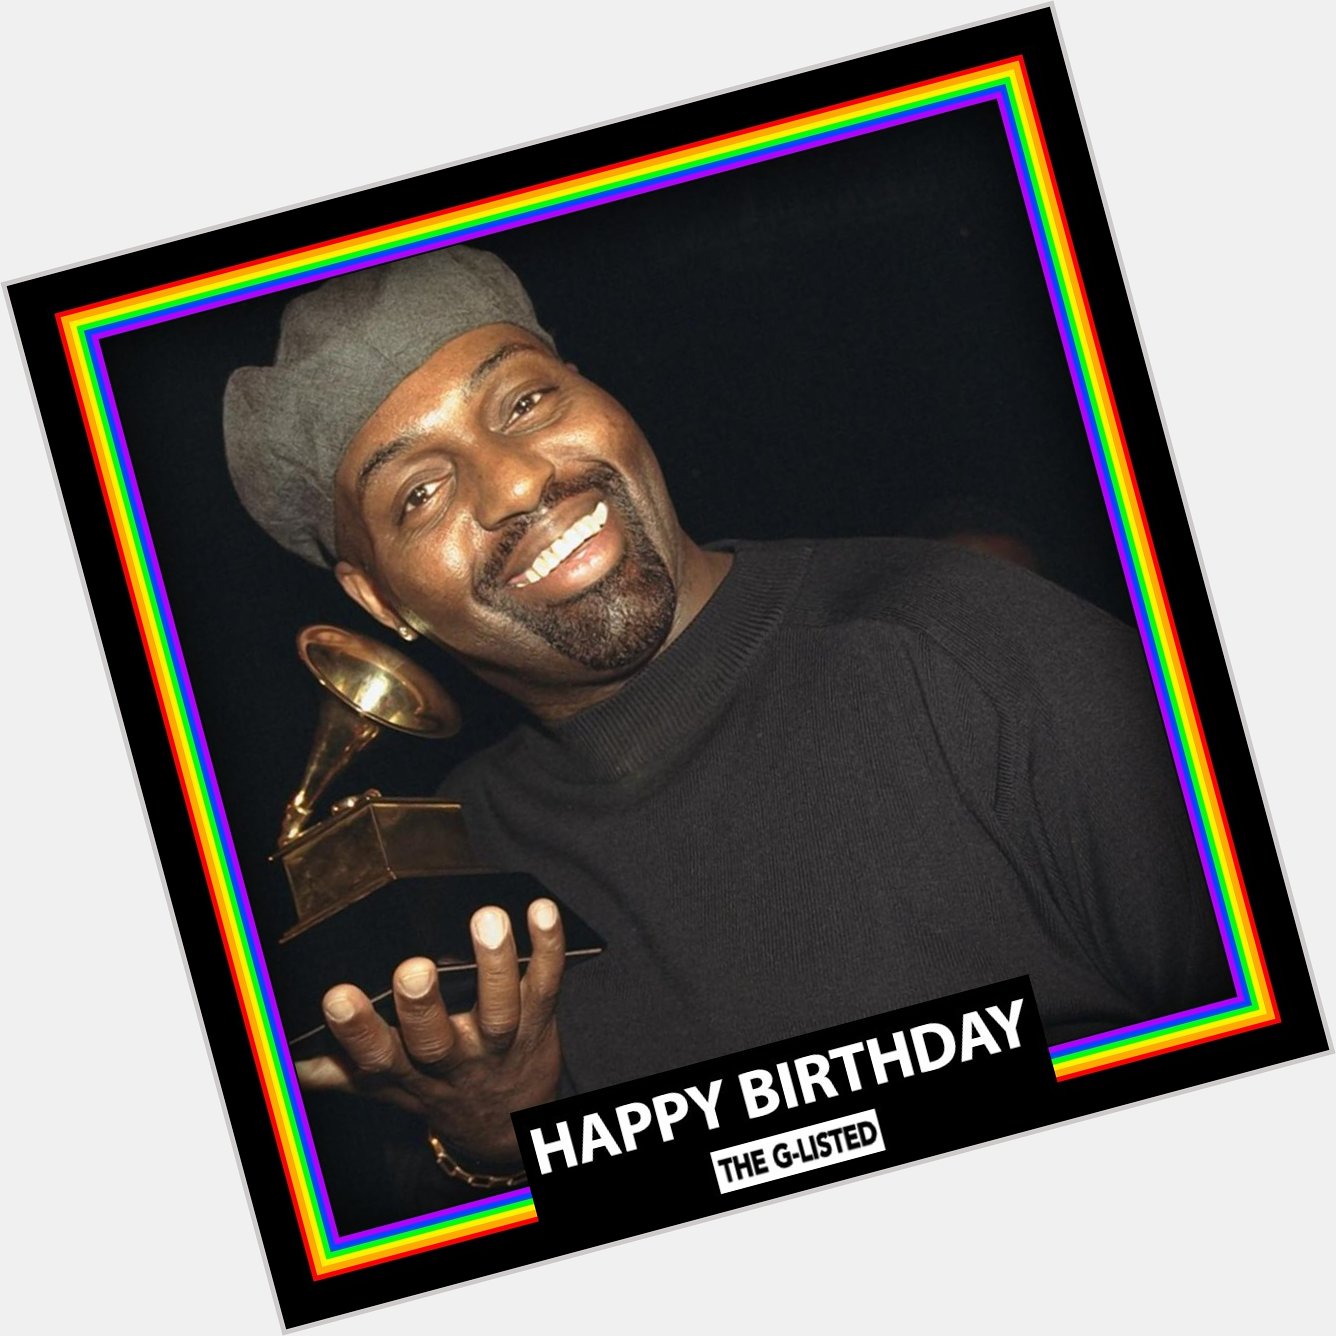 Happy birthday to the legendary Godfather of house music Frankie Knuckles!!! 